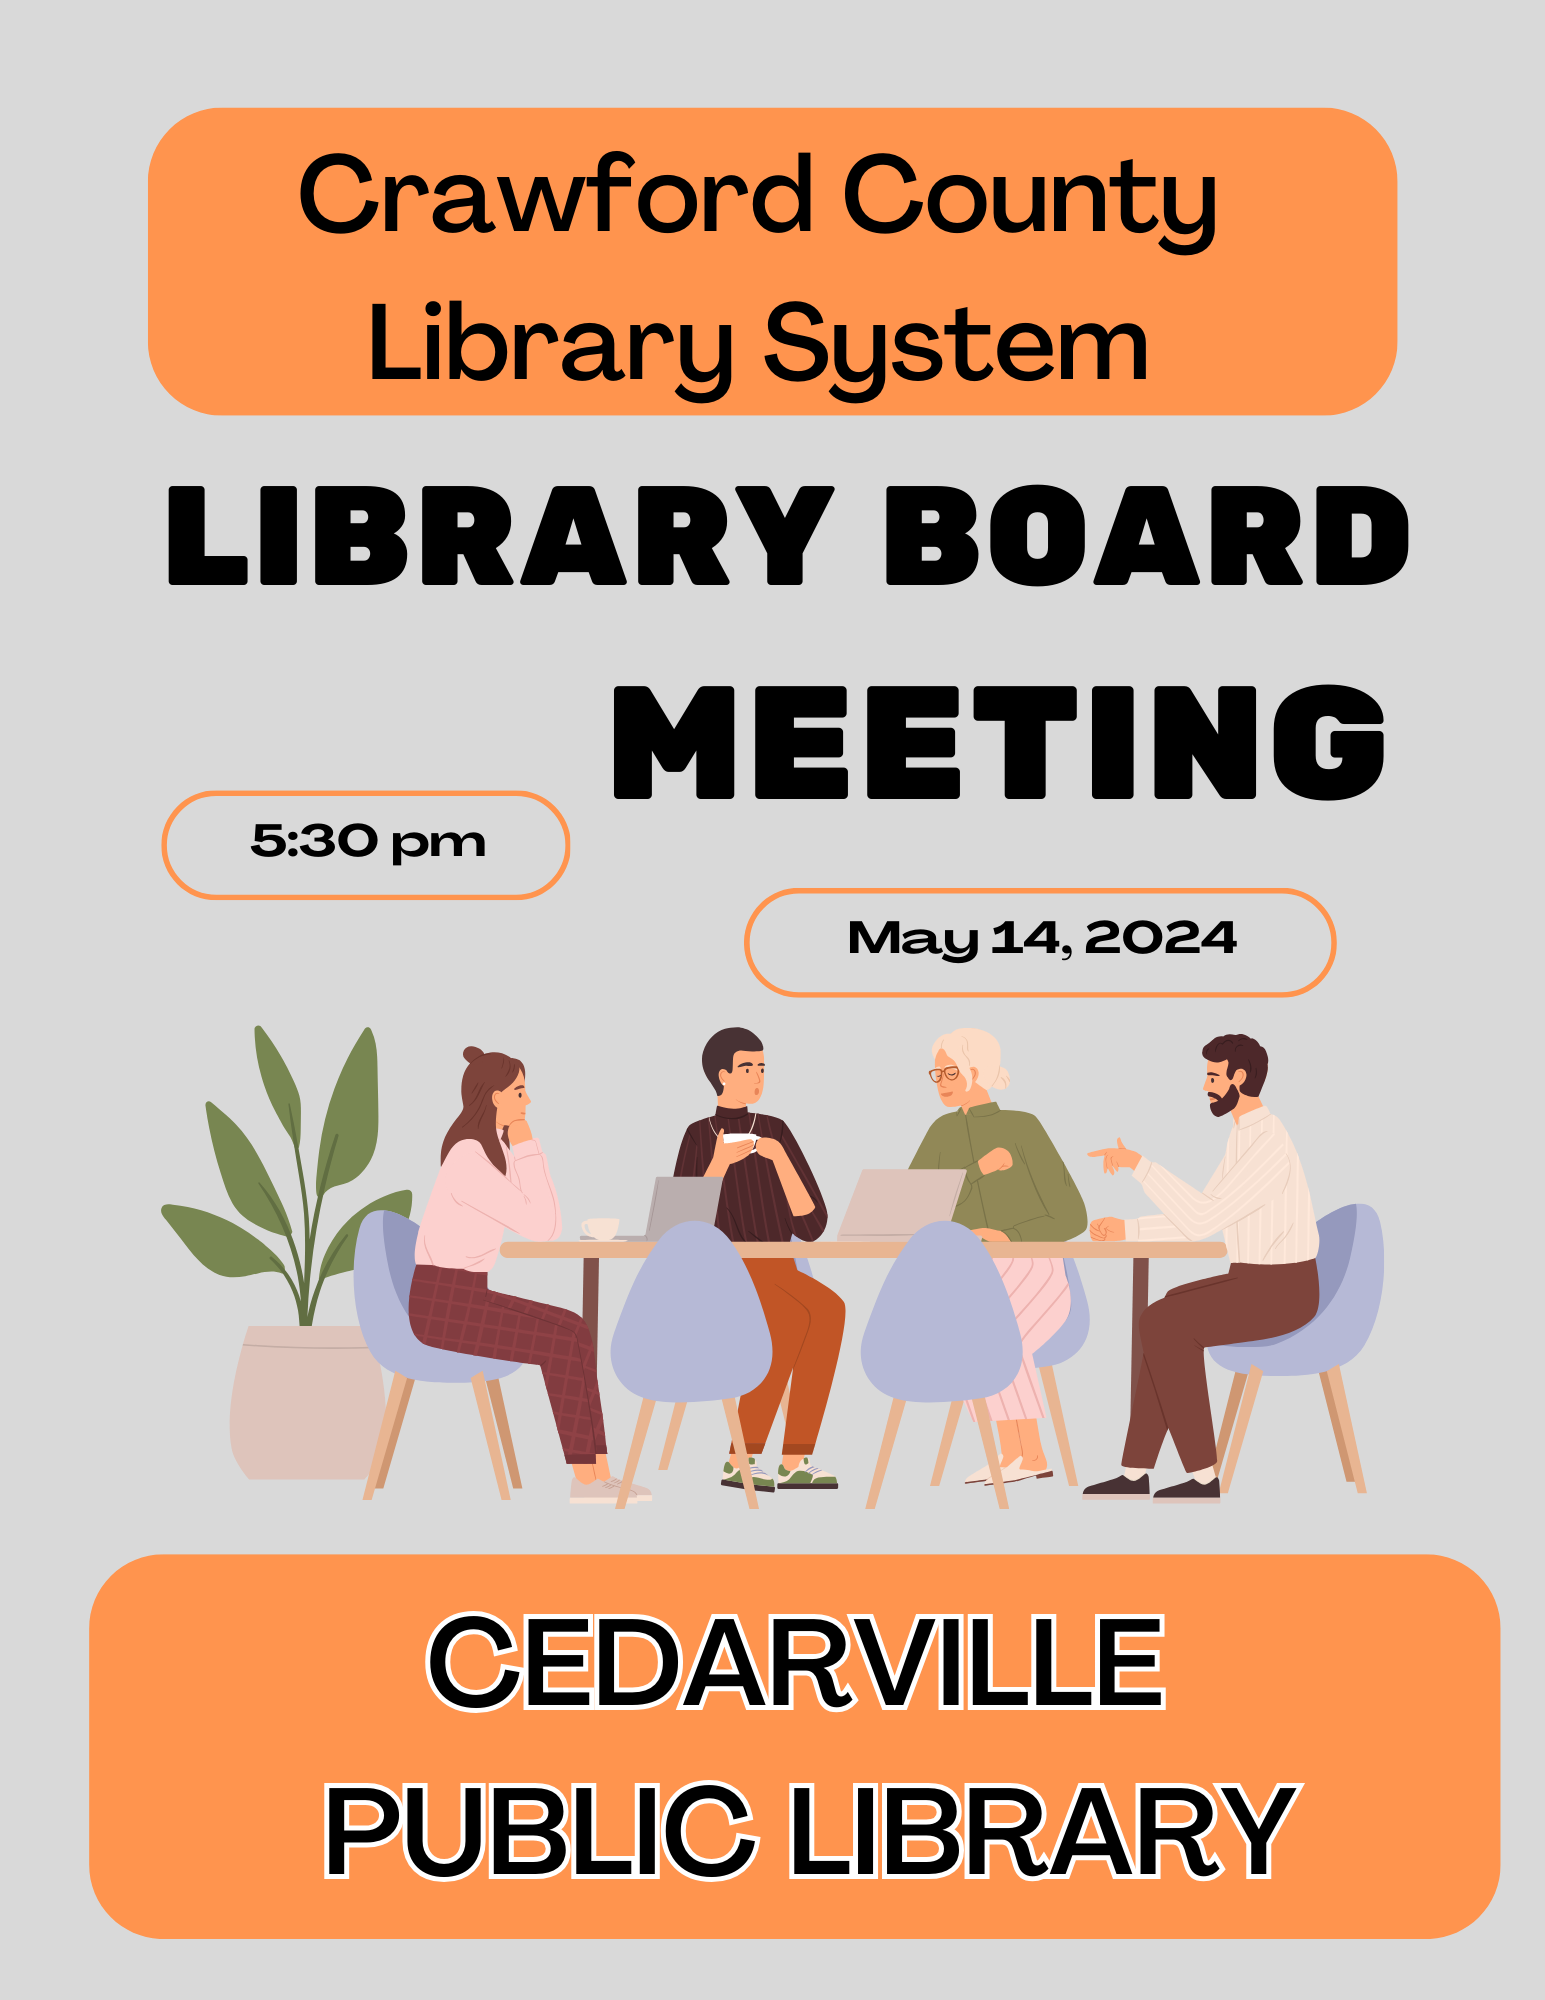 CCLS Board Meeting May 14th 5:30 at the Cedarville Public Library